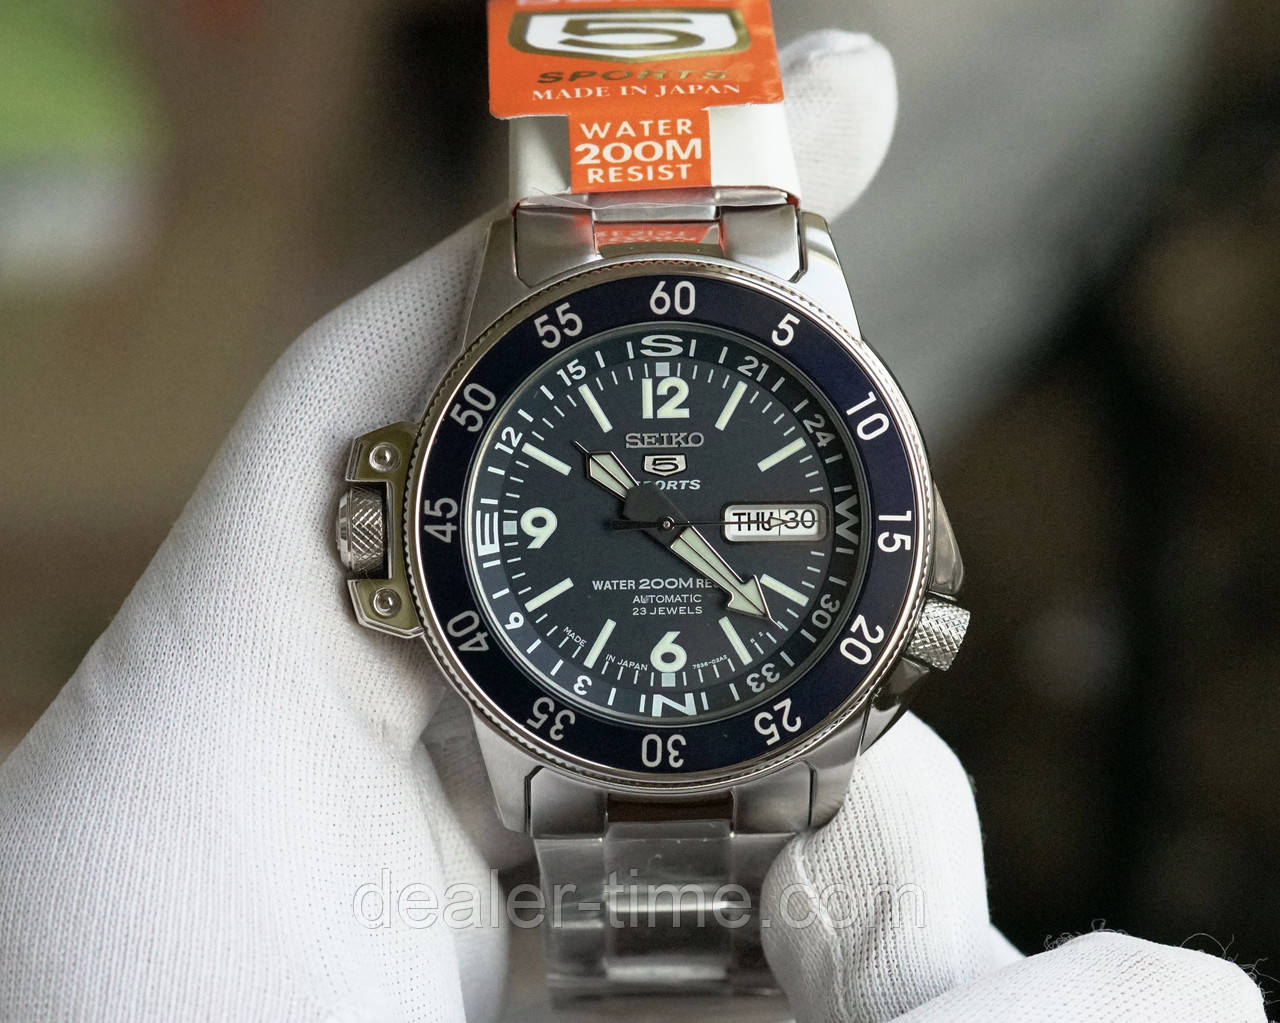 Seiko SKZ209J1 Automatic Map Meter Diver MADE IN JAPAN